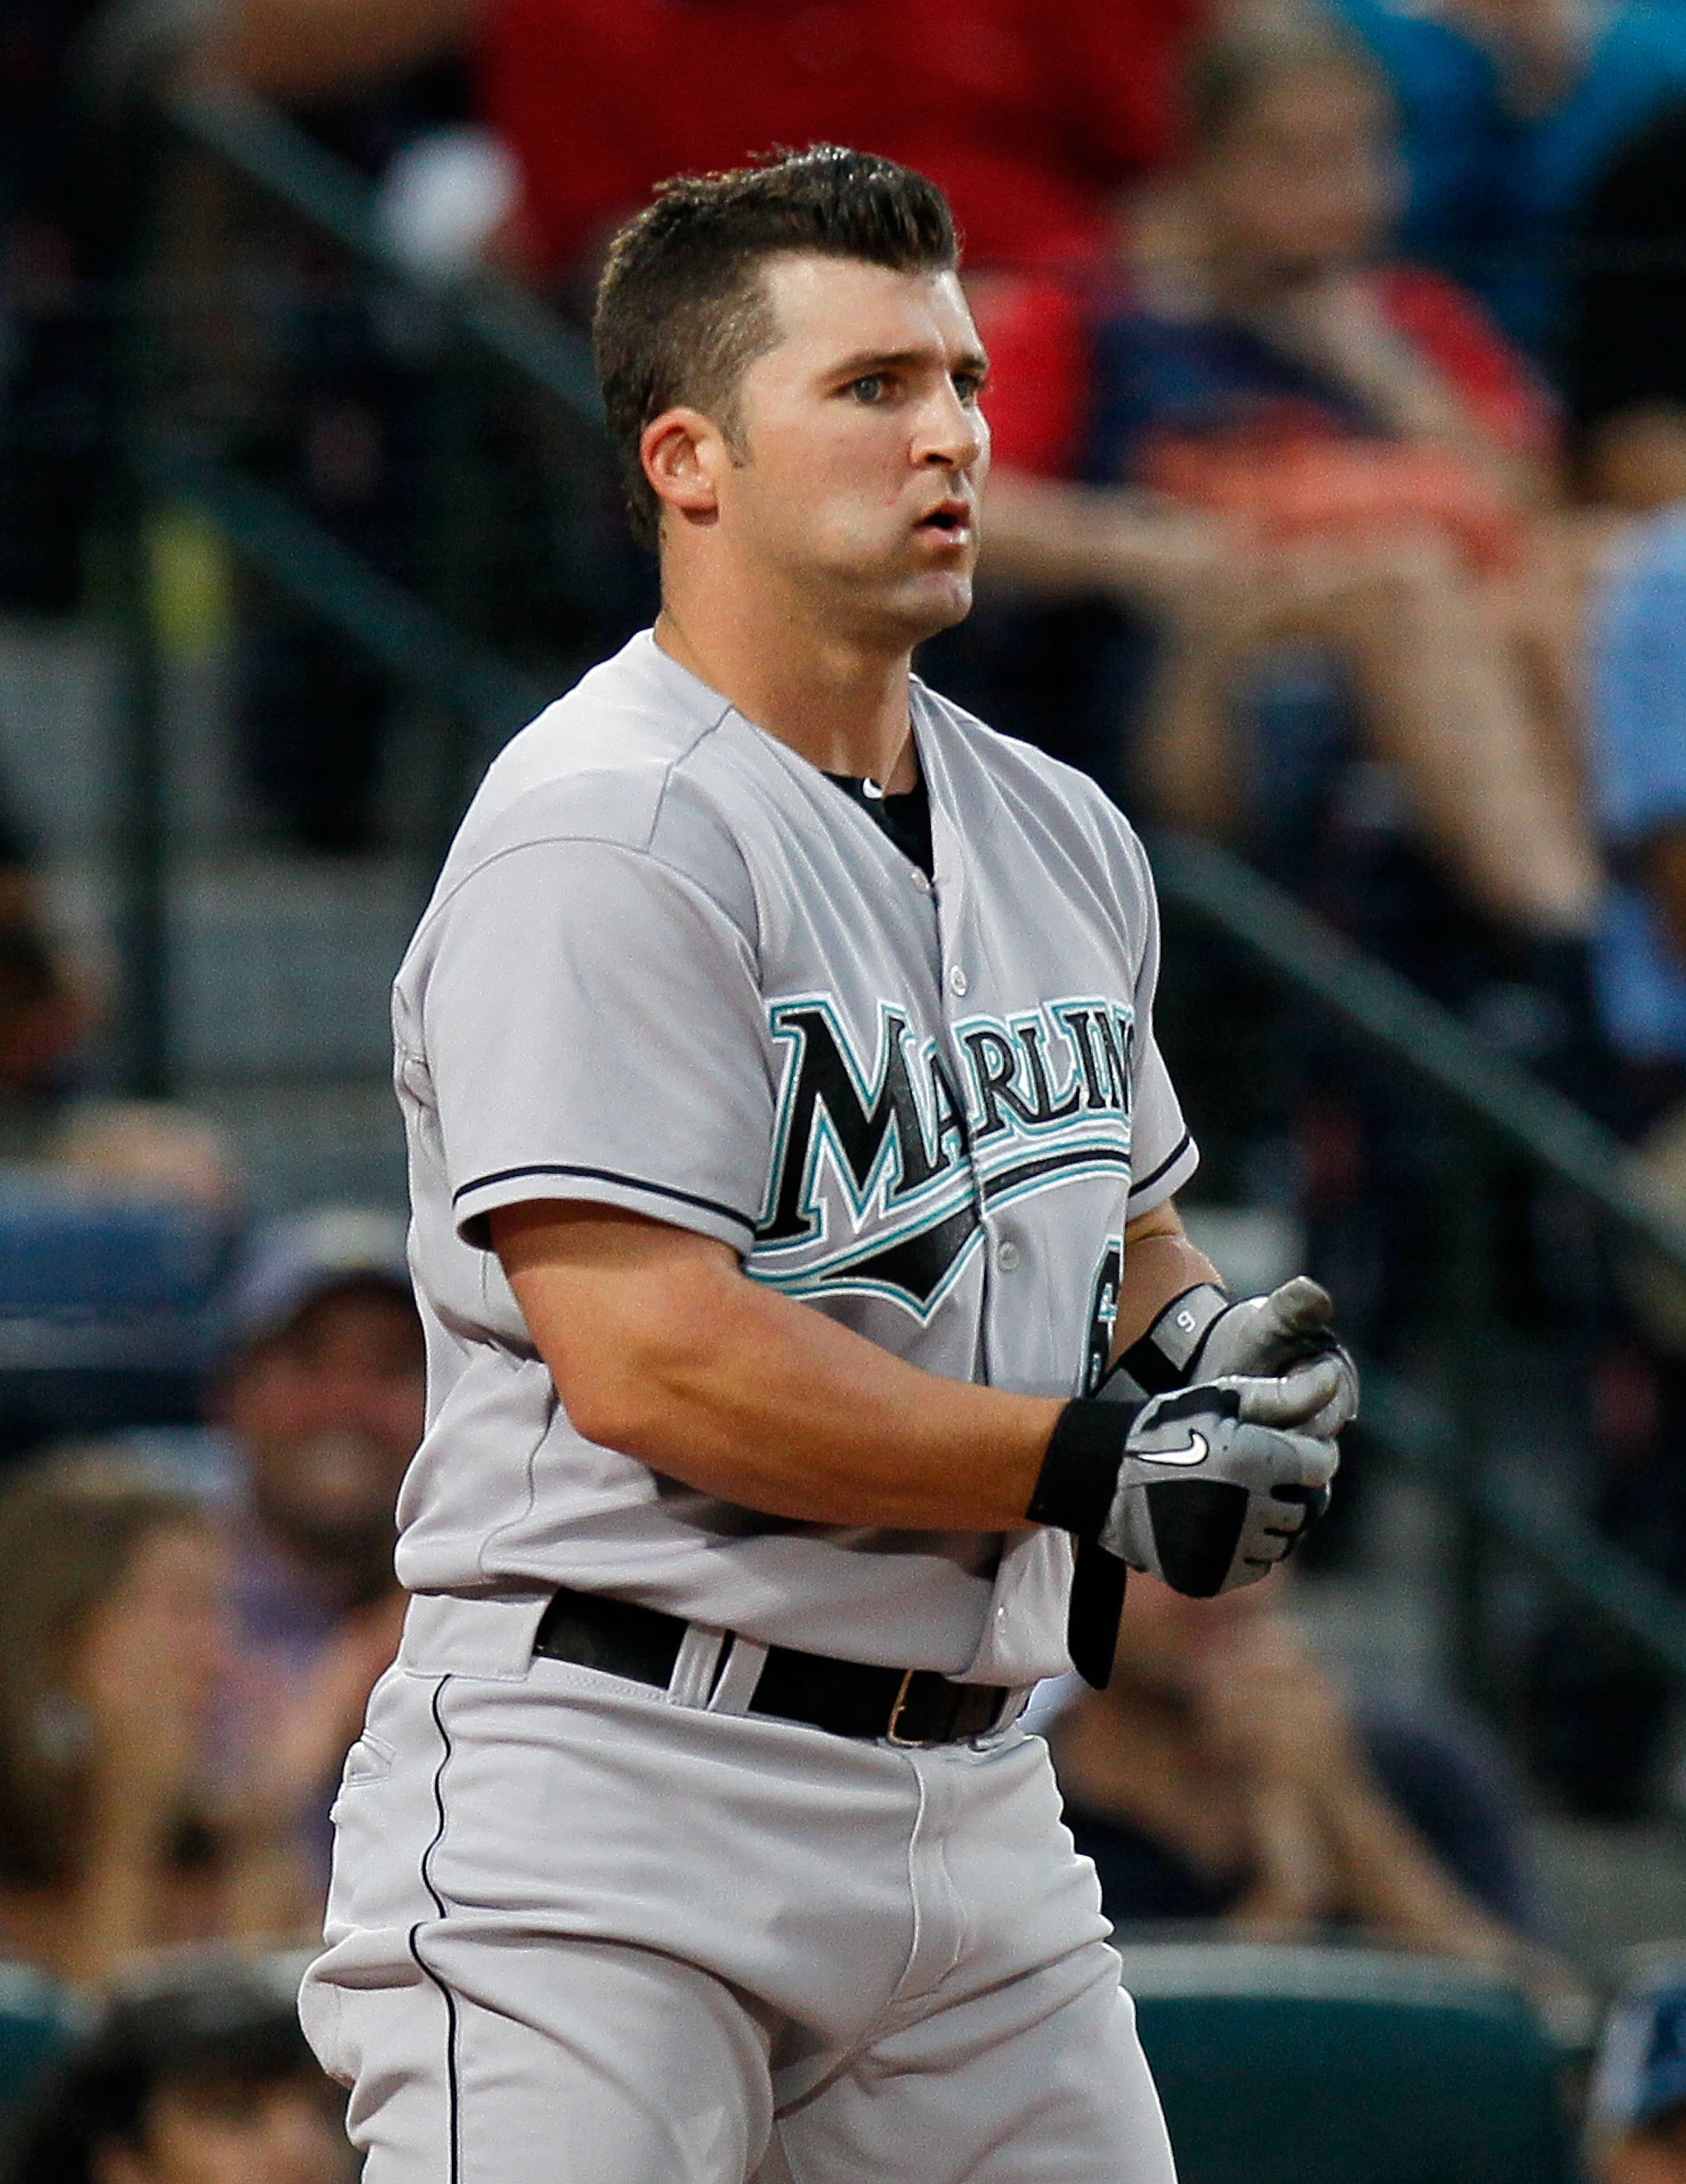 Dan Uggla Is Traded From the Marlins to the Braves - The New York